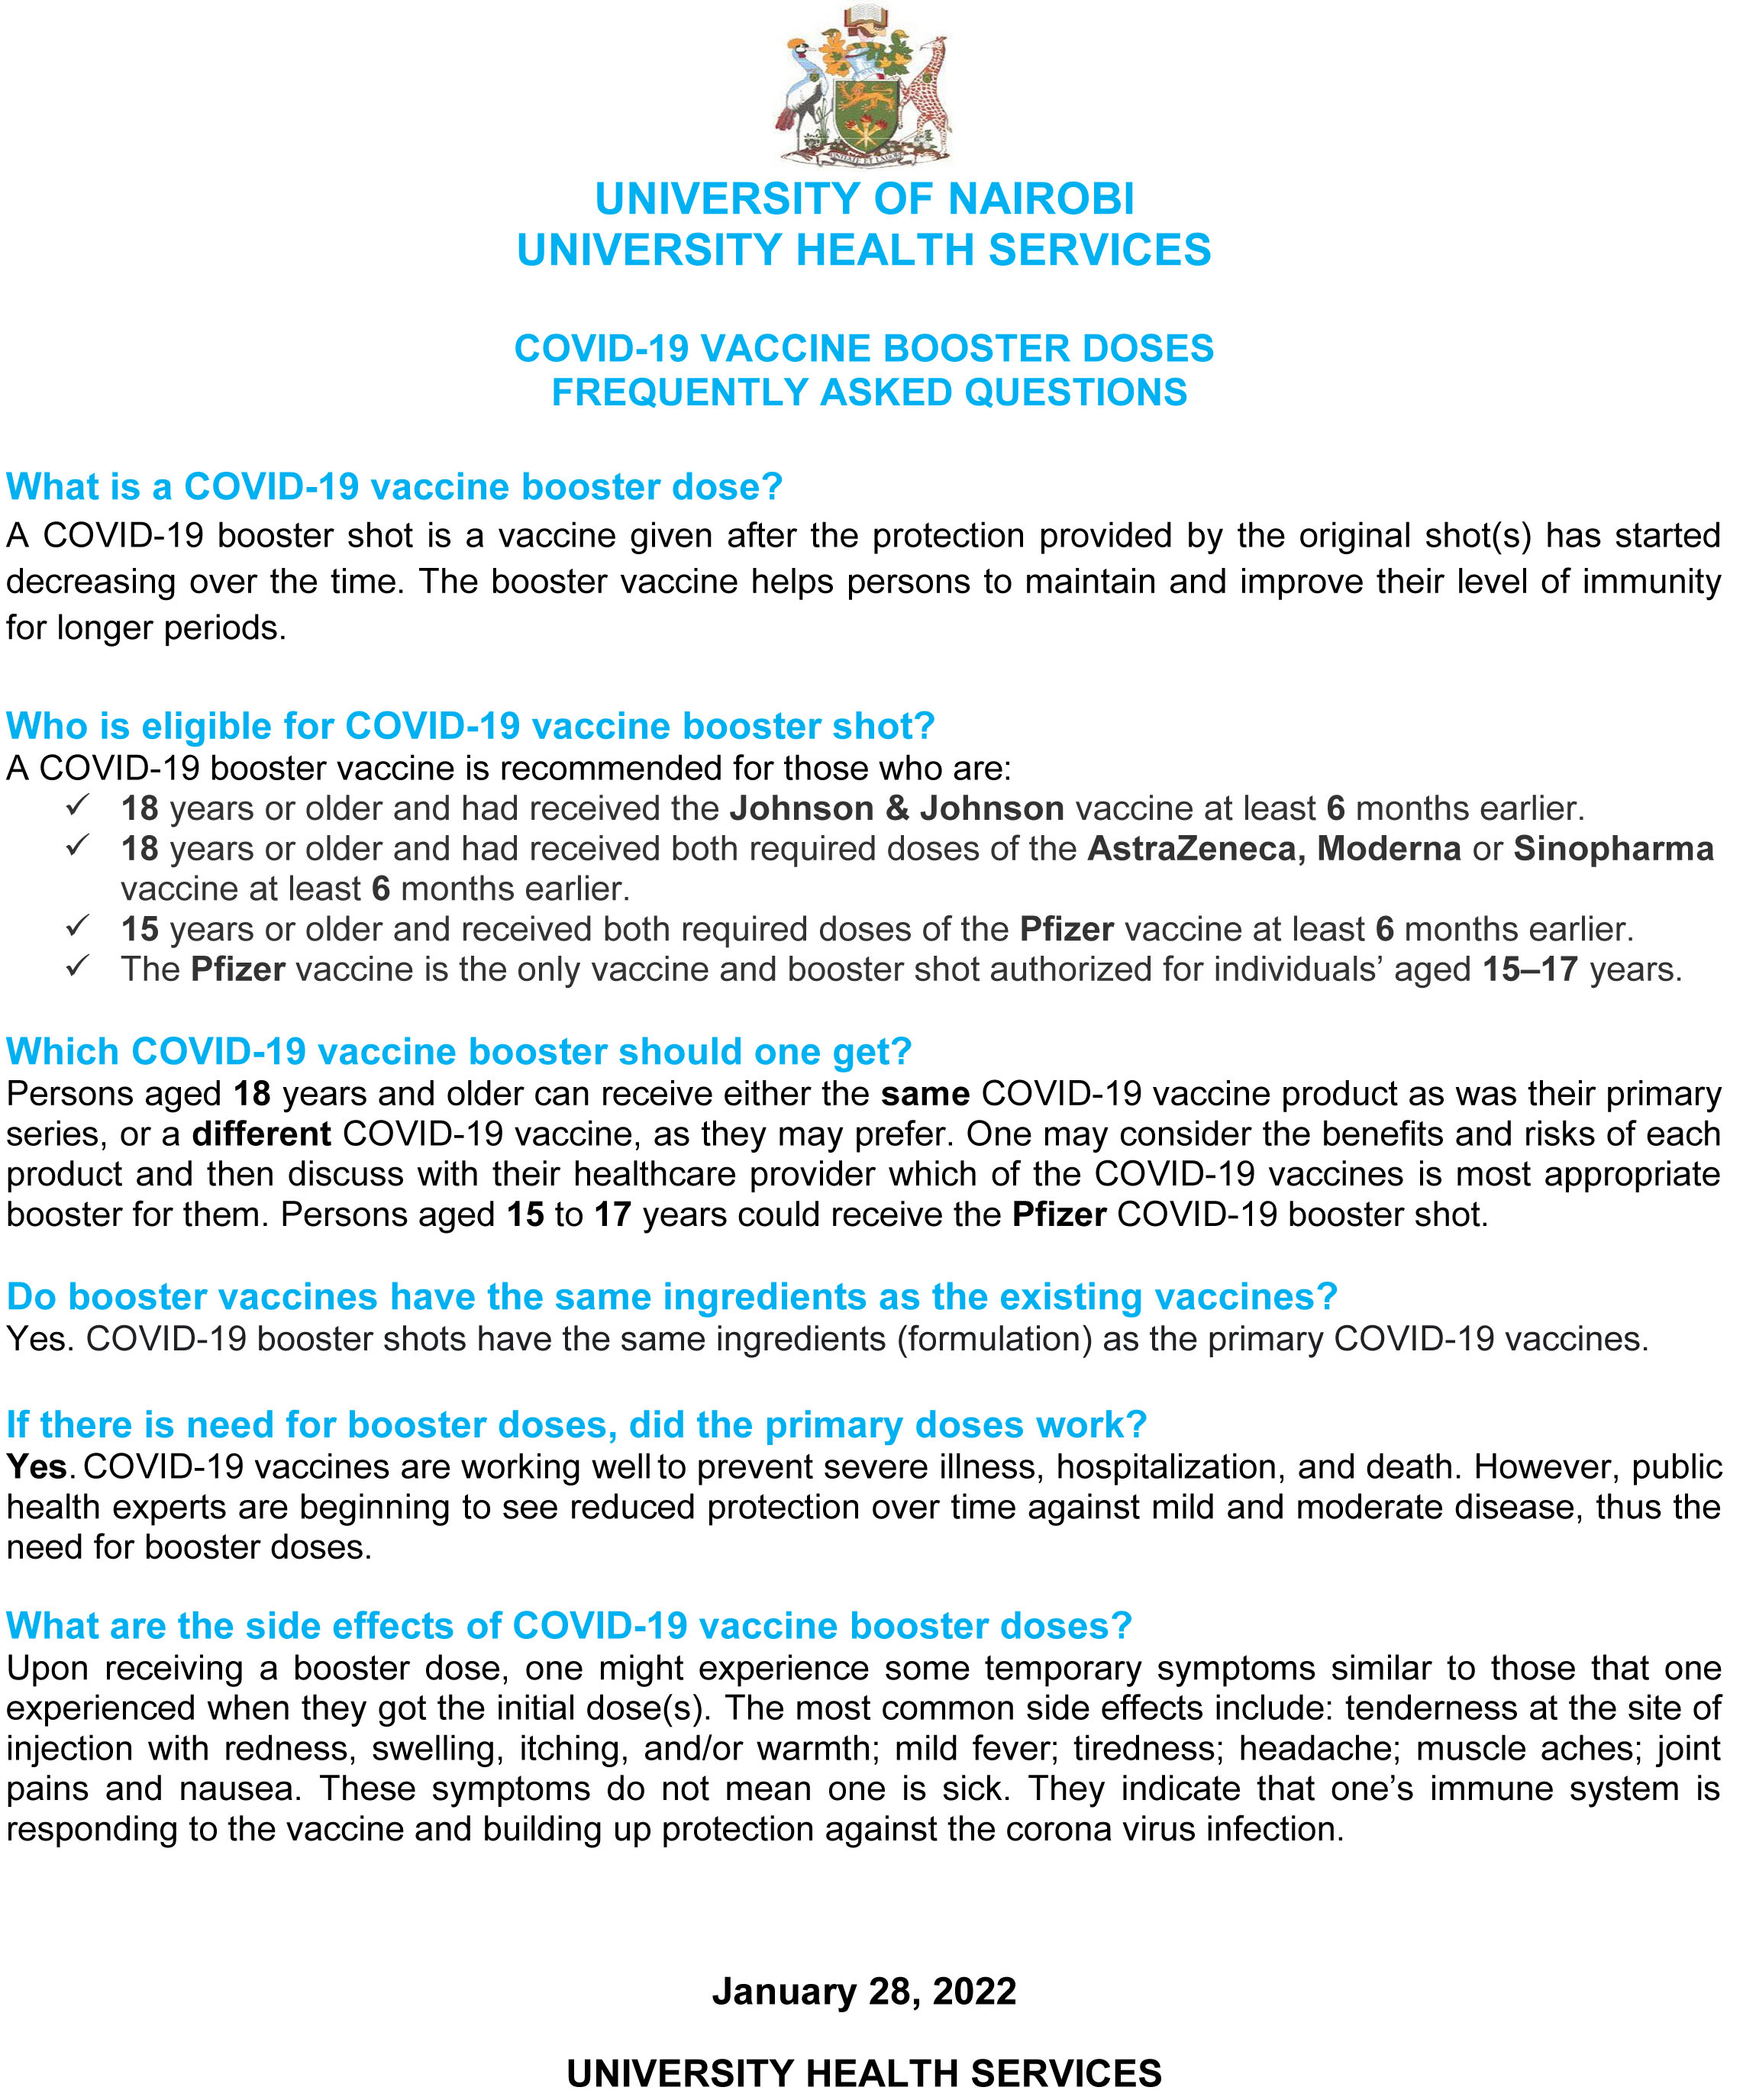 COVID-19 VACCINE BOOSTER DOSES FREQUENTLY ASKED QUESTIONS.